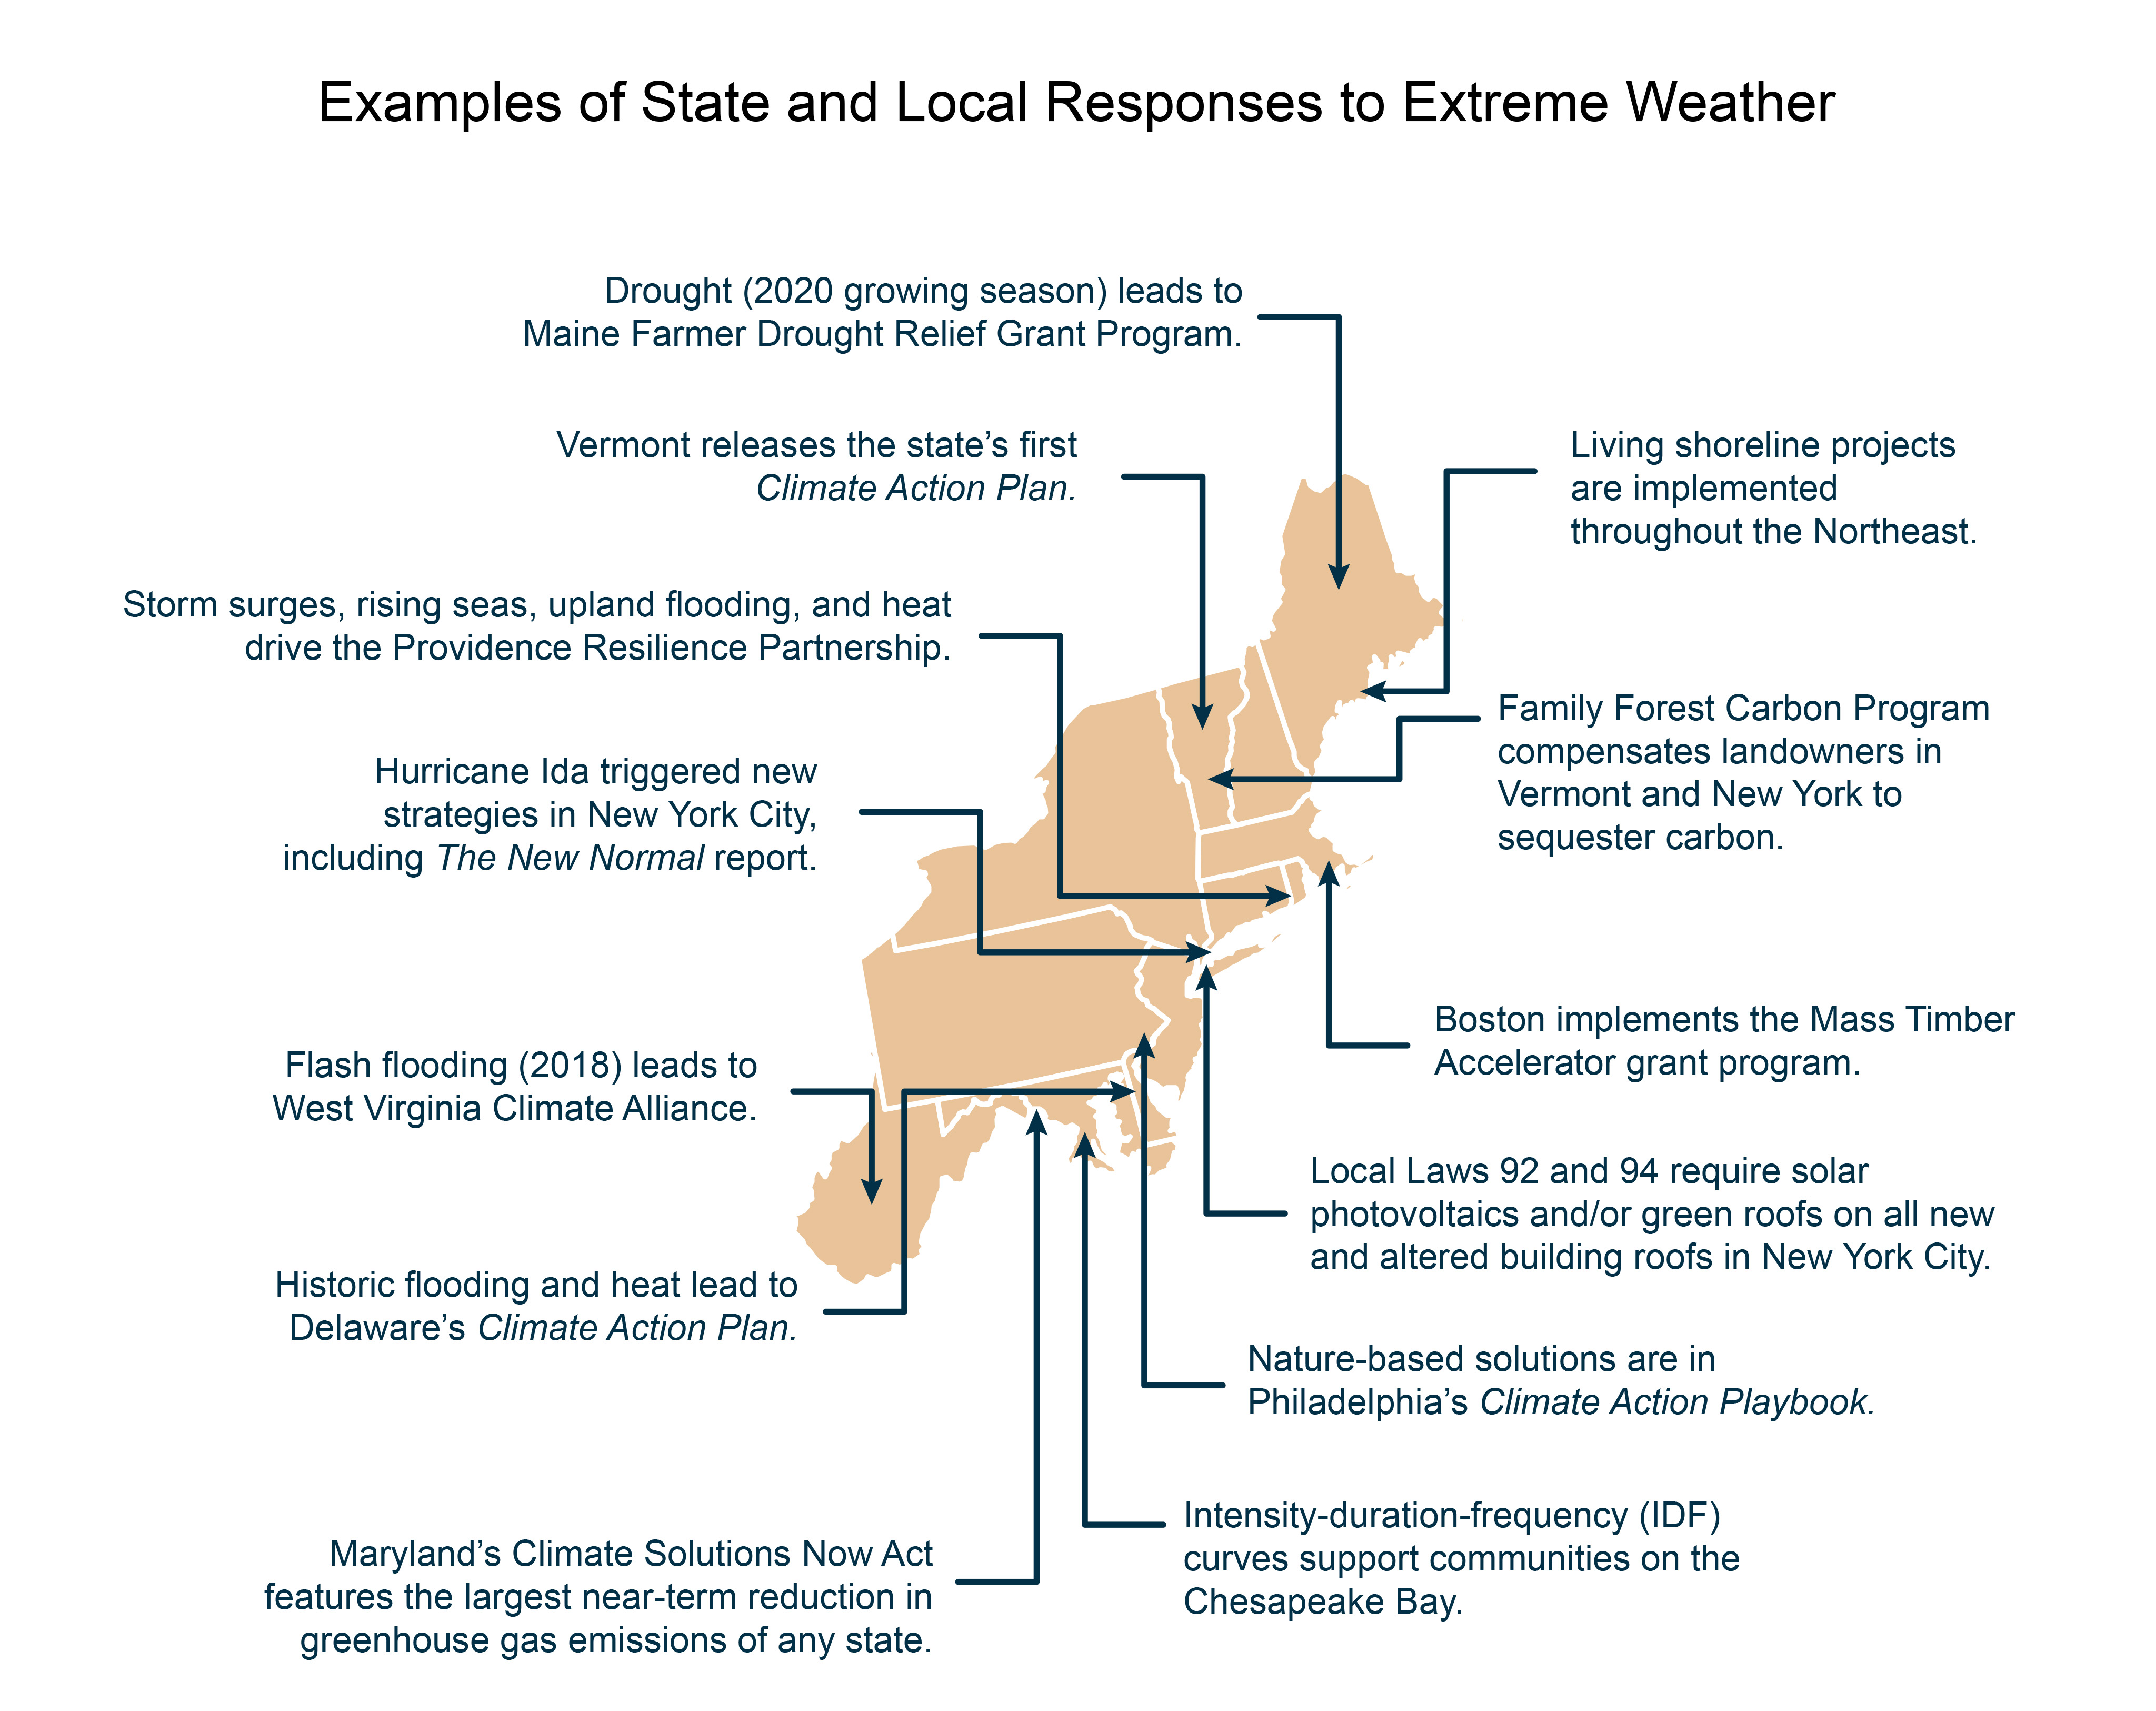 Examples of State and Local Responses to Extreme Weather